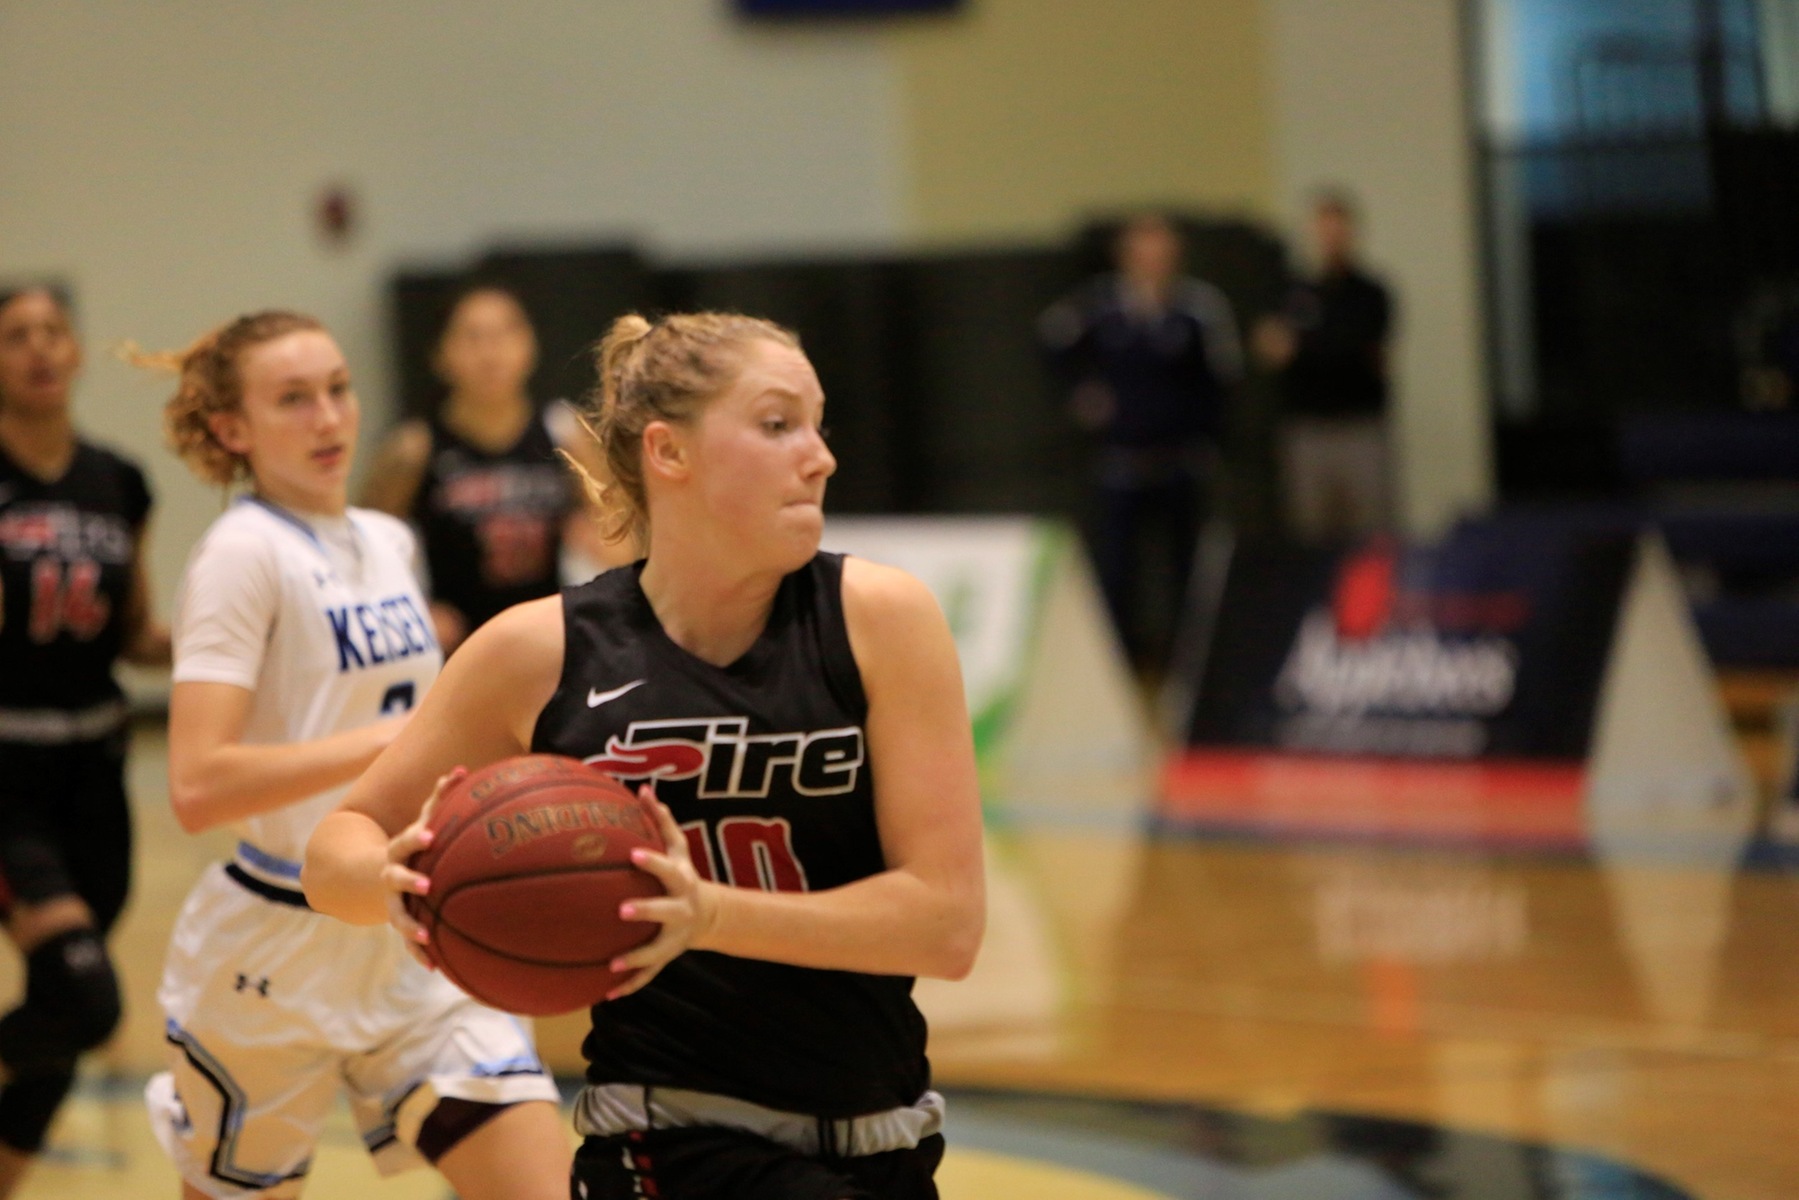 NAIA Division II Women's Basketball National Player of the Week - No. 10